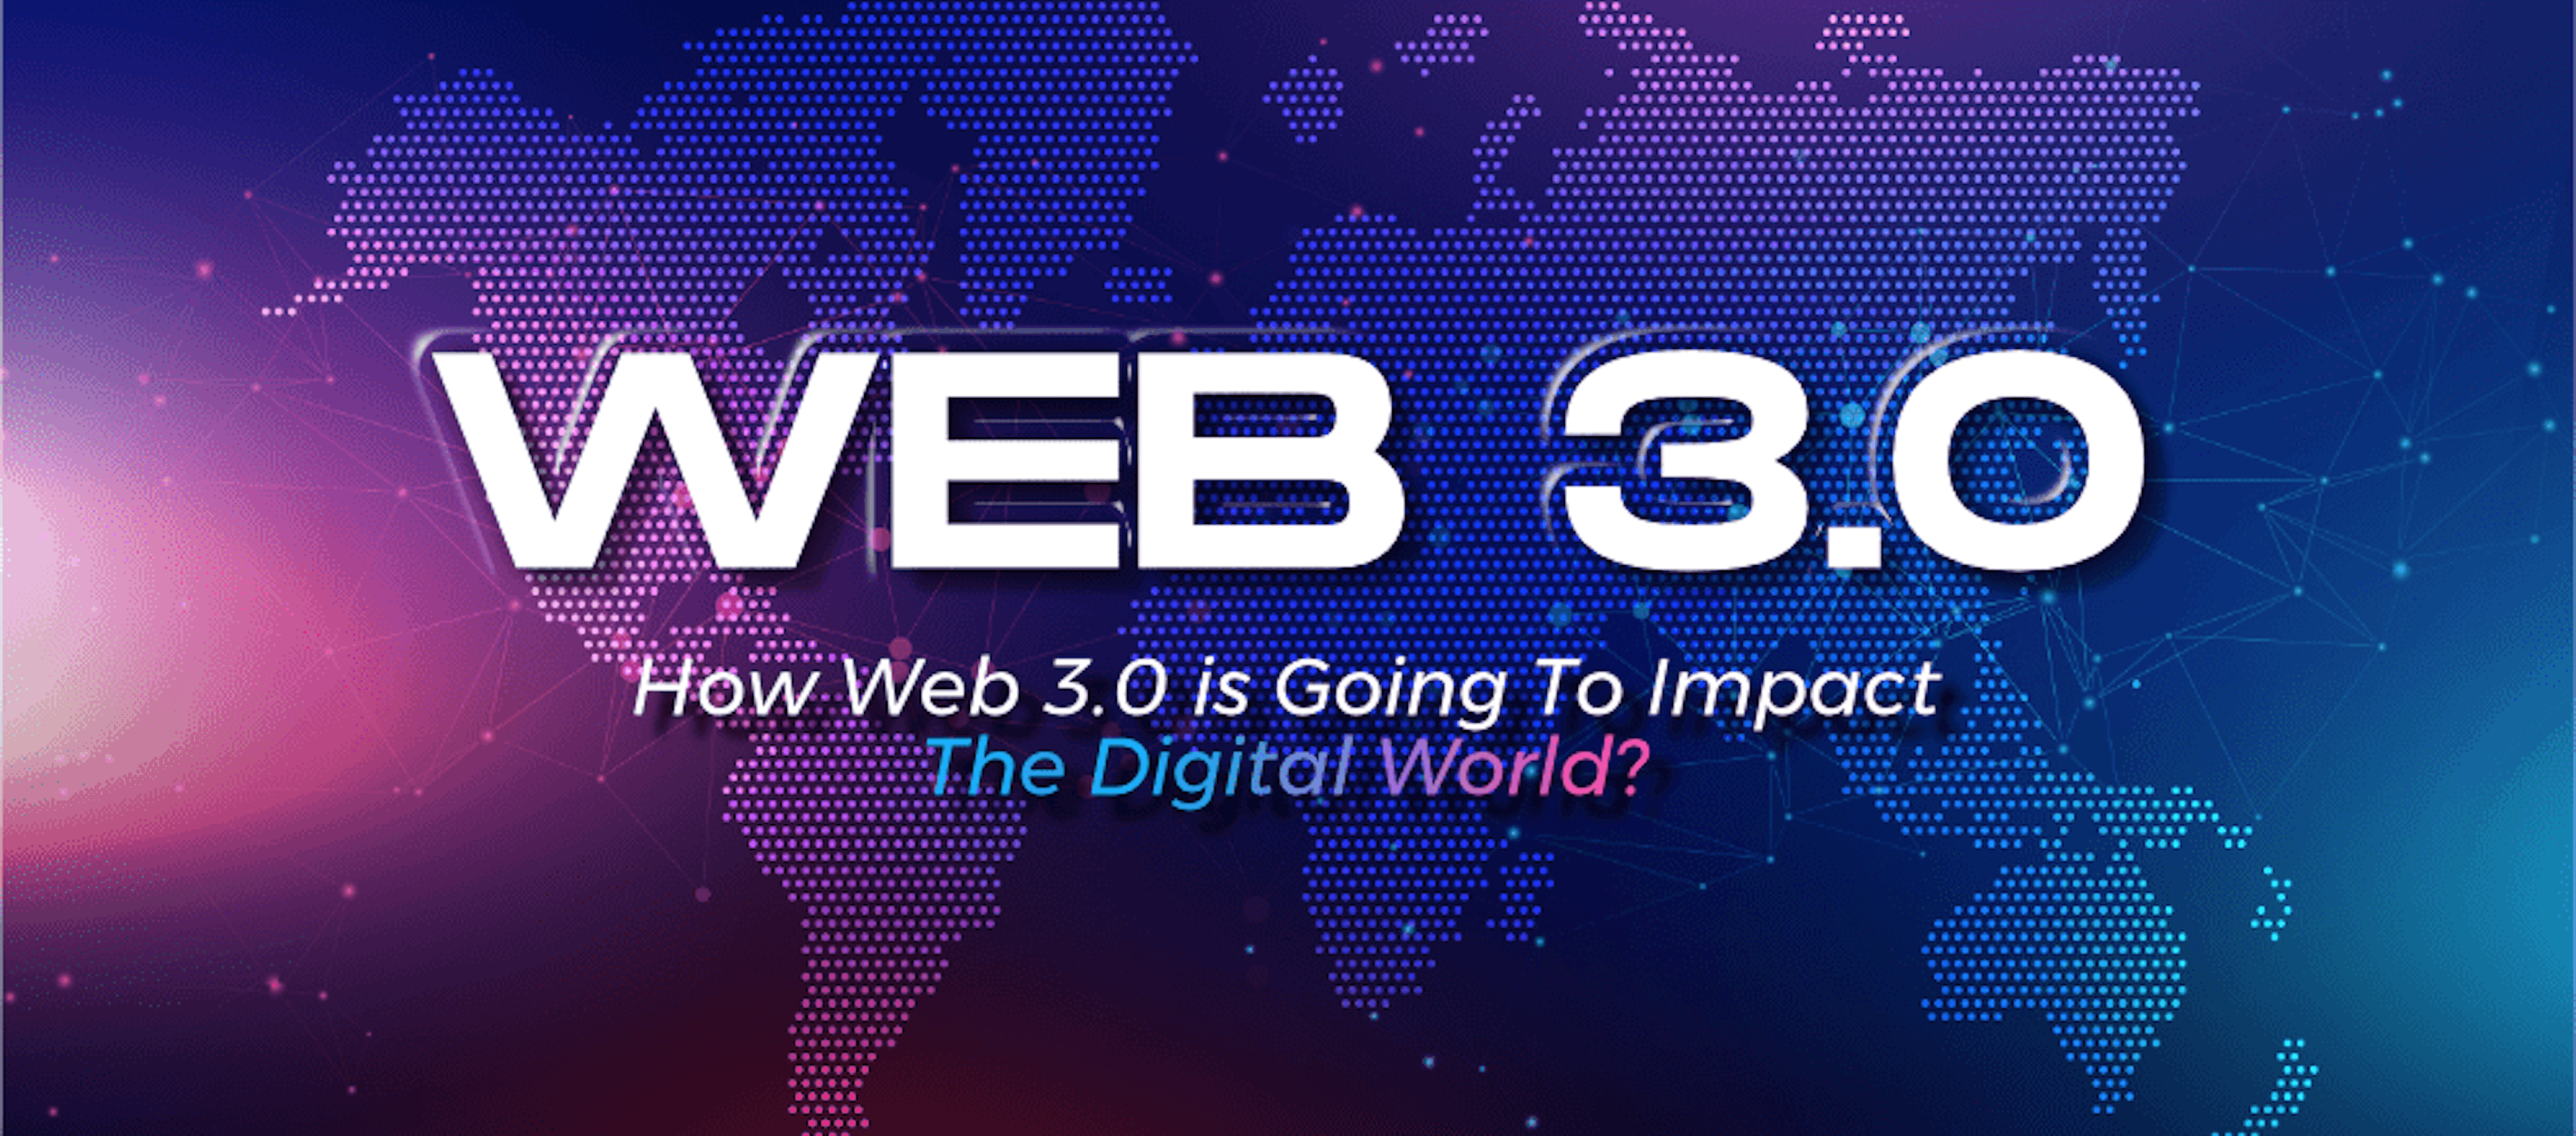 How Web 3.0 is Going to Impact the Digital World?